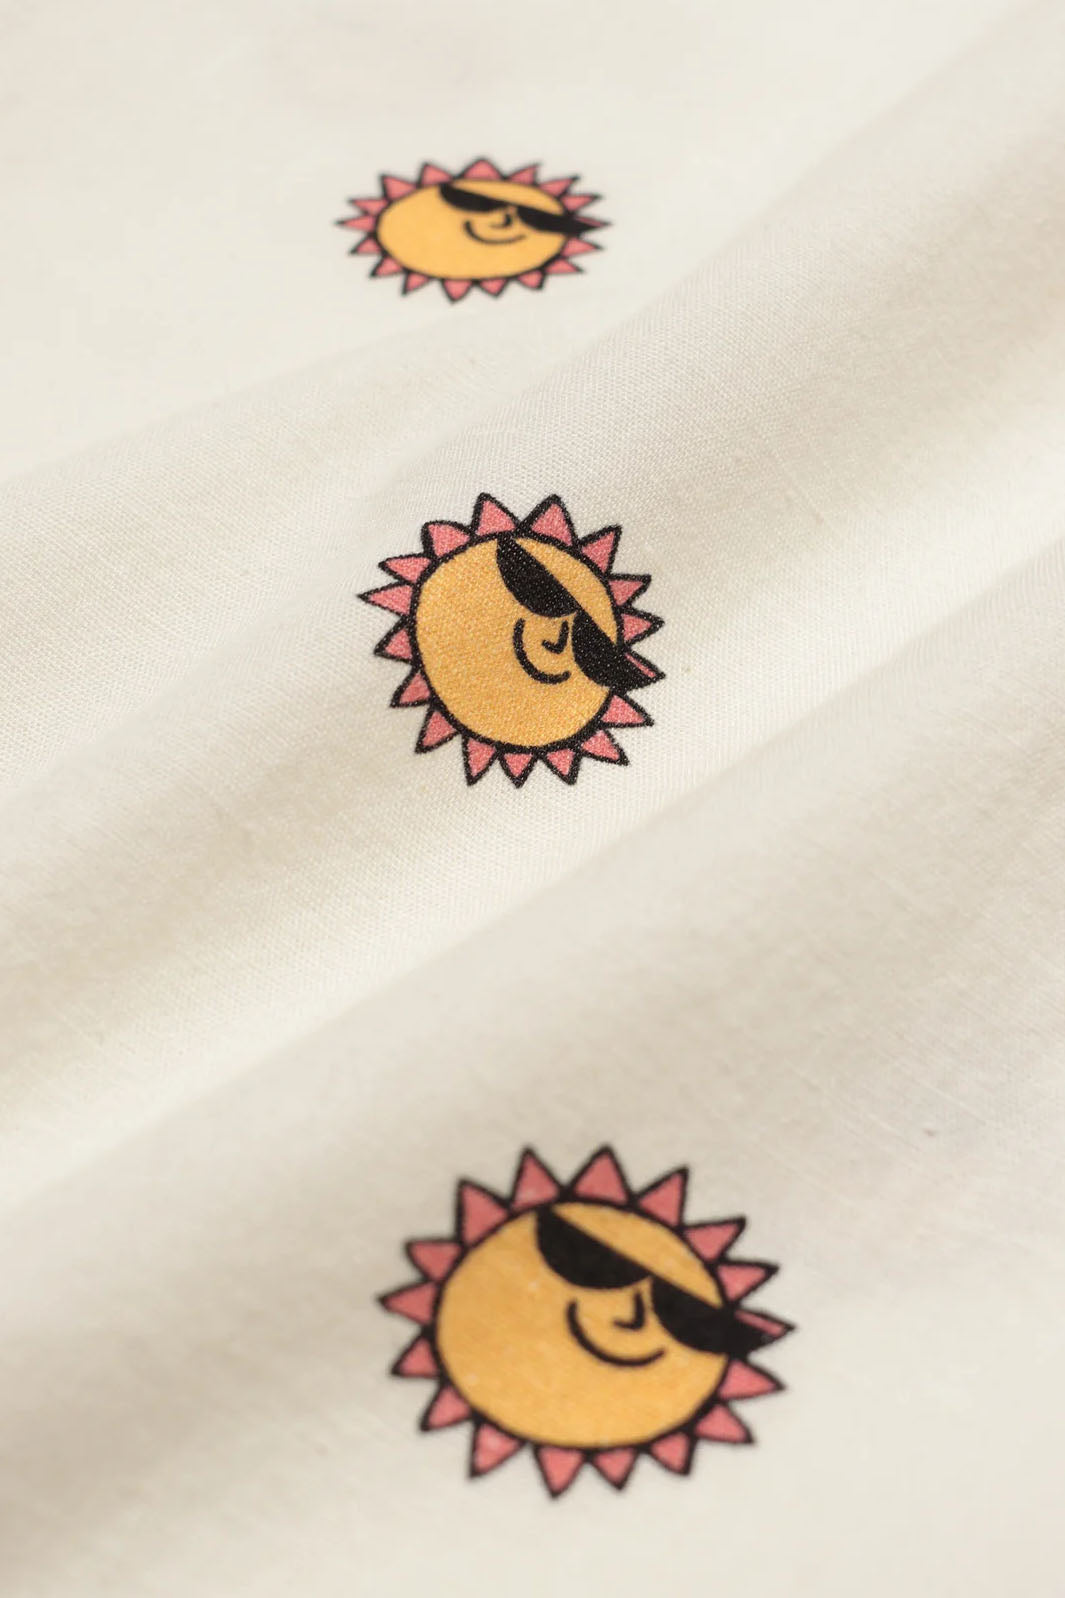 Classic Button-Up Shirt - White Sunny Print